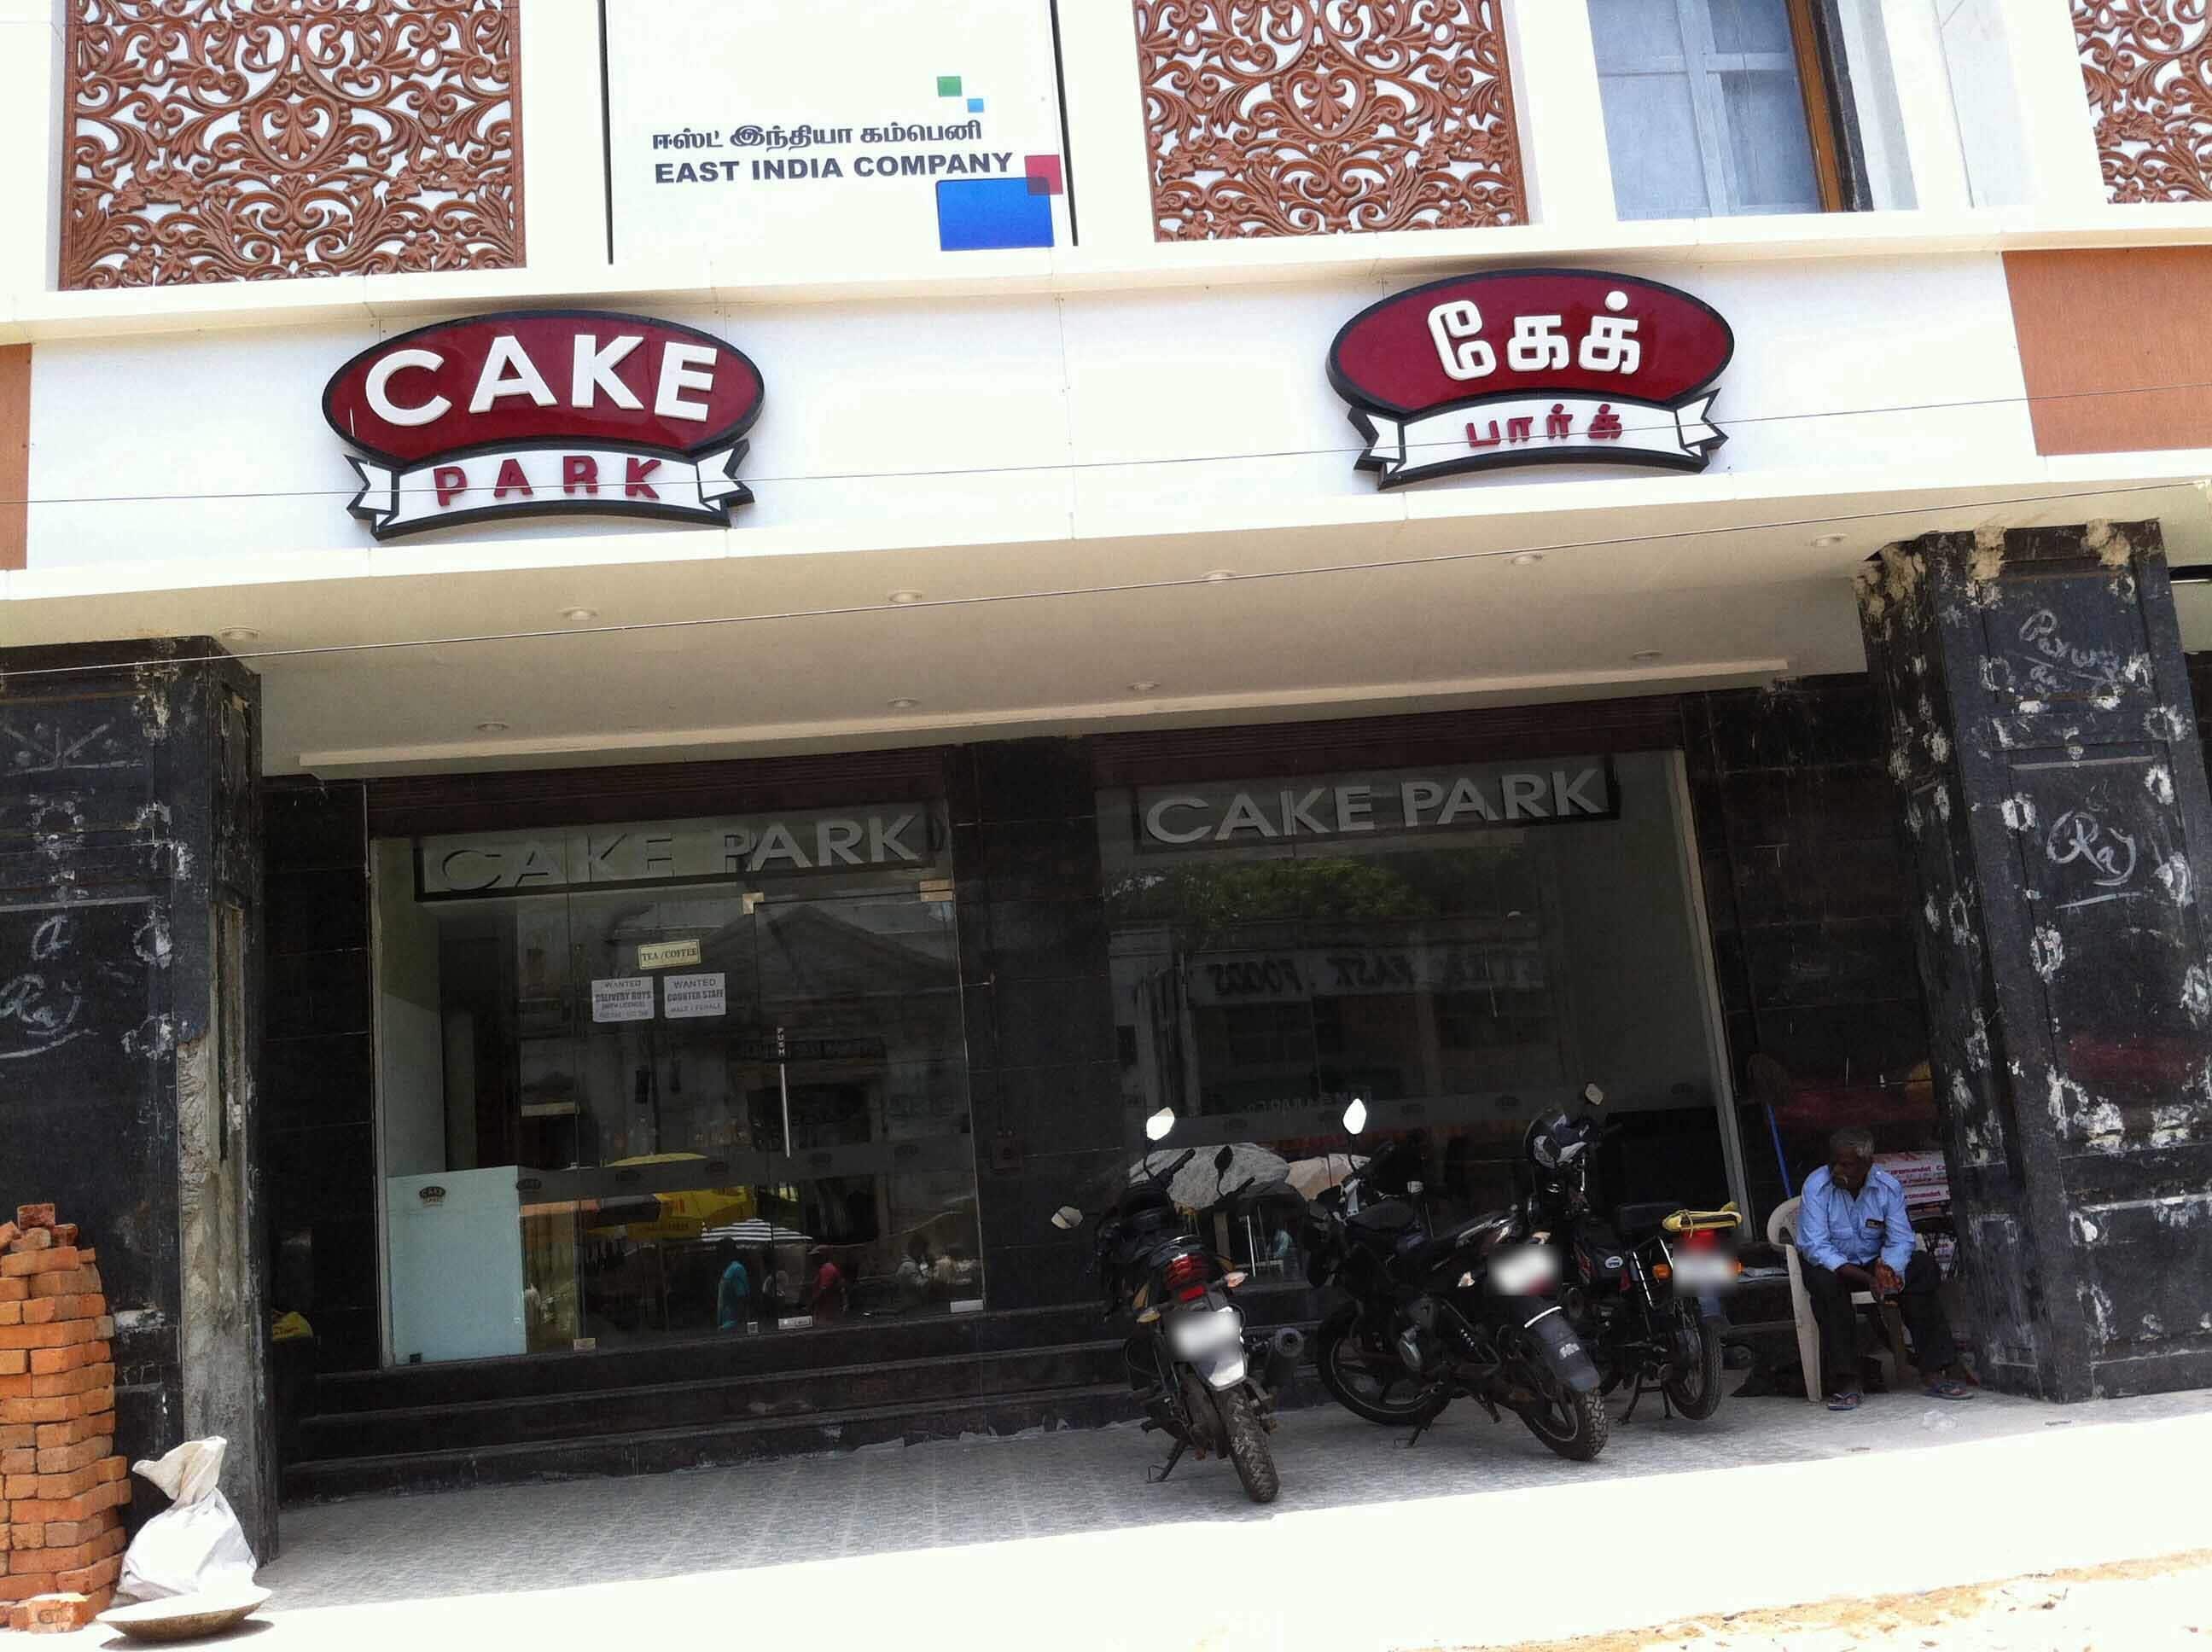 Inaugral Offers - 20% Off only at Arumbakkam Outlet- Cake Park #chennai |  Flourless cake, Cookie gifts, Plum cake